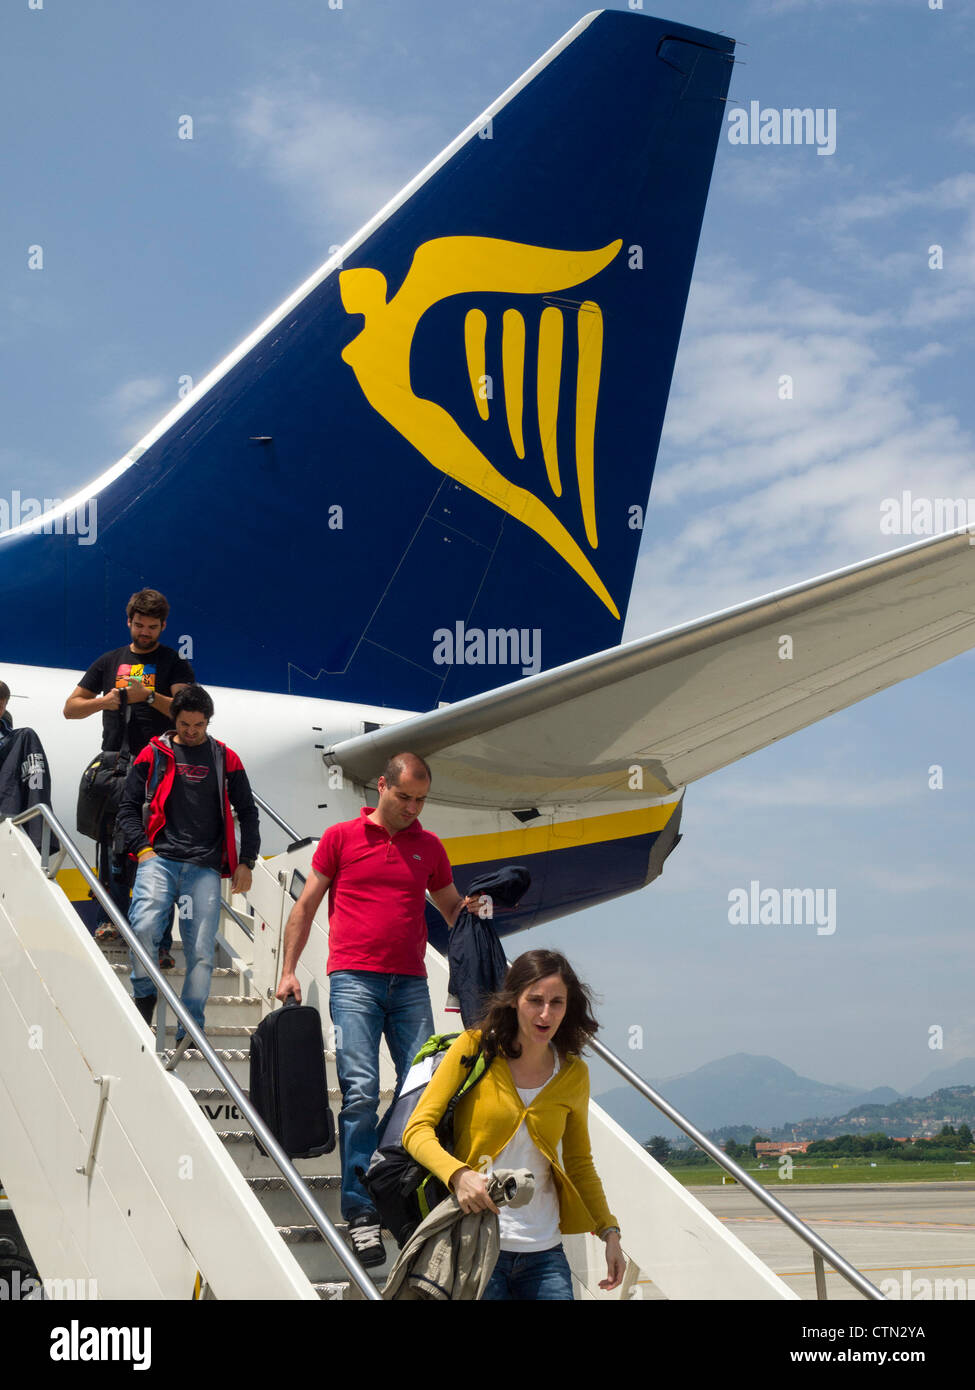 Passengers unboarding a Ryanair airplane Stock Photo